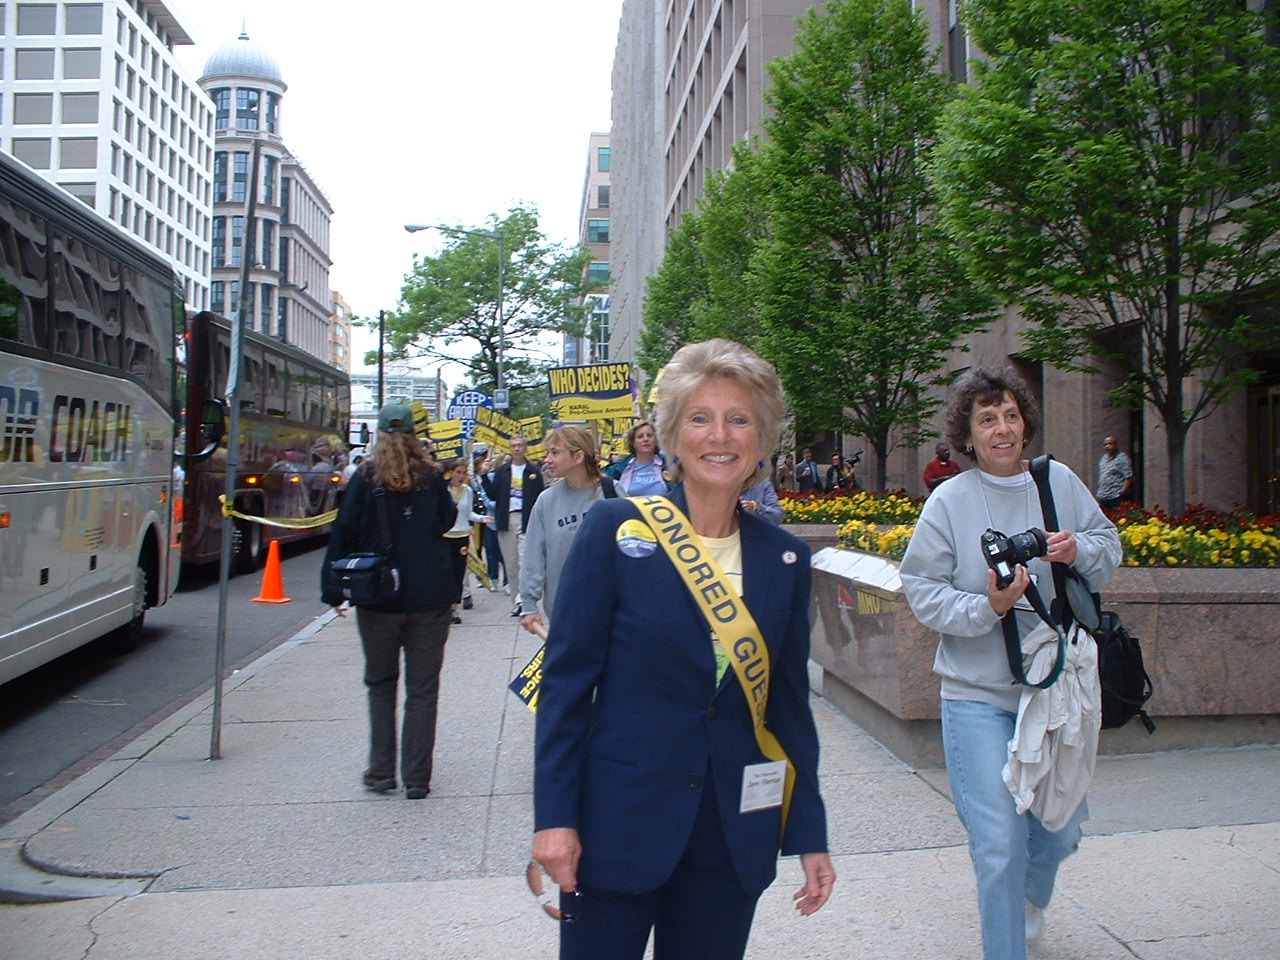 Rep. Harman at the March for Women's Lives in Washington, DC, on April 25.